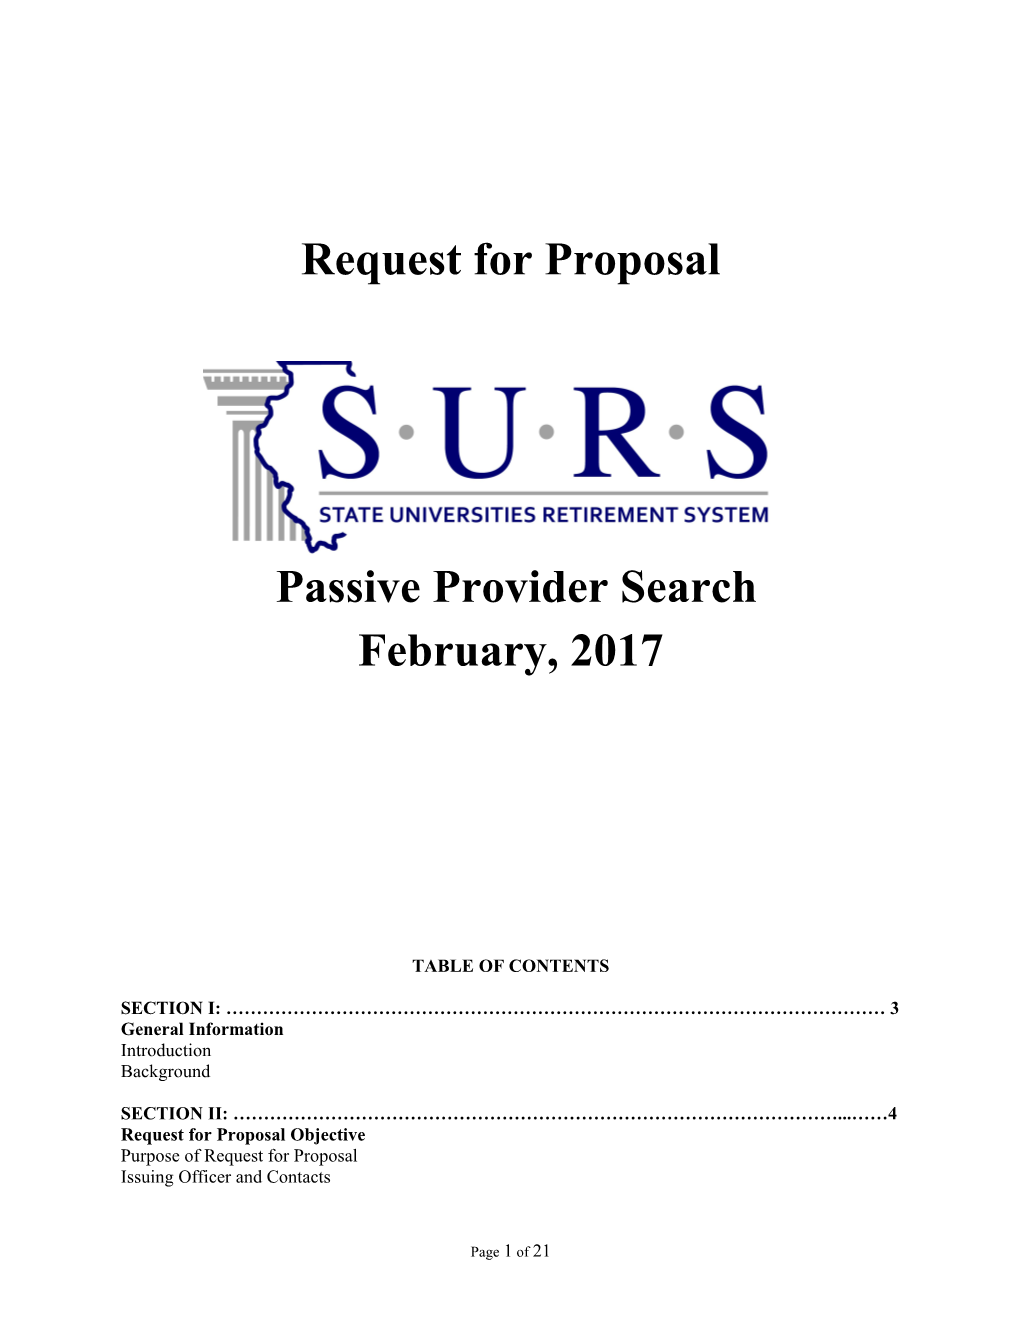 Request for Proposal Objective